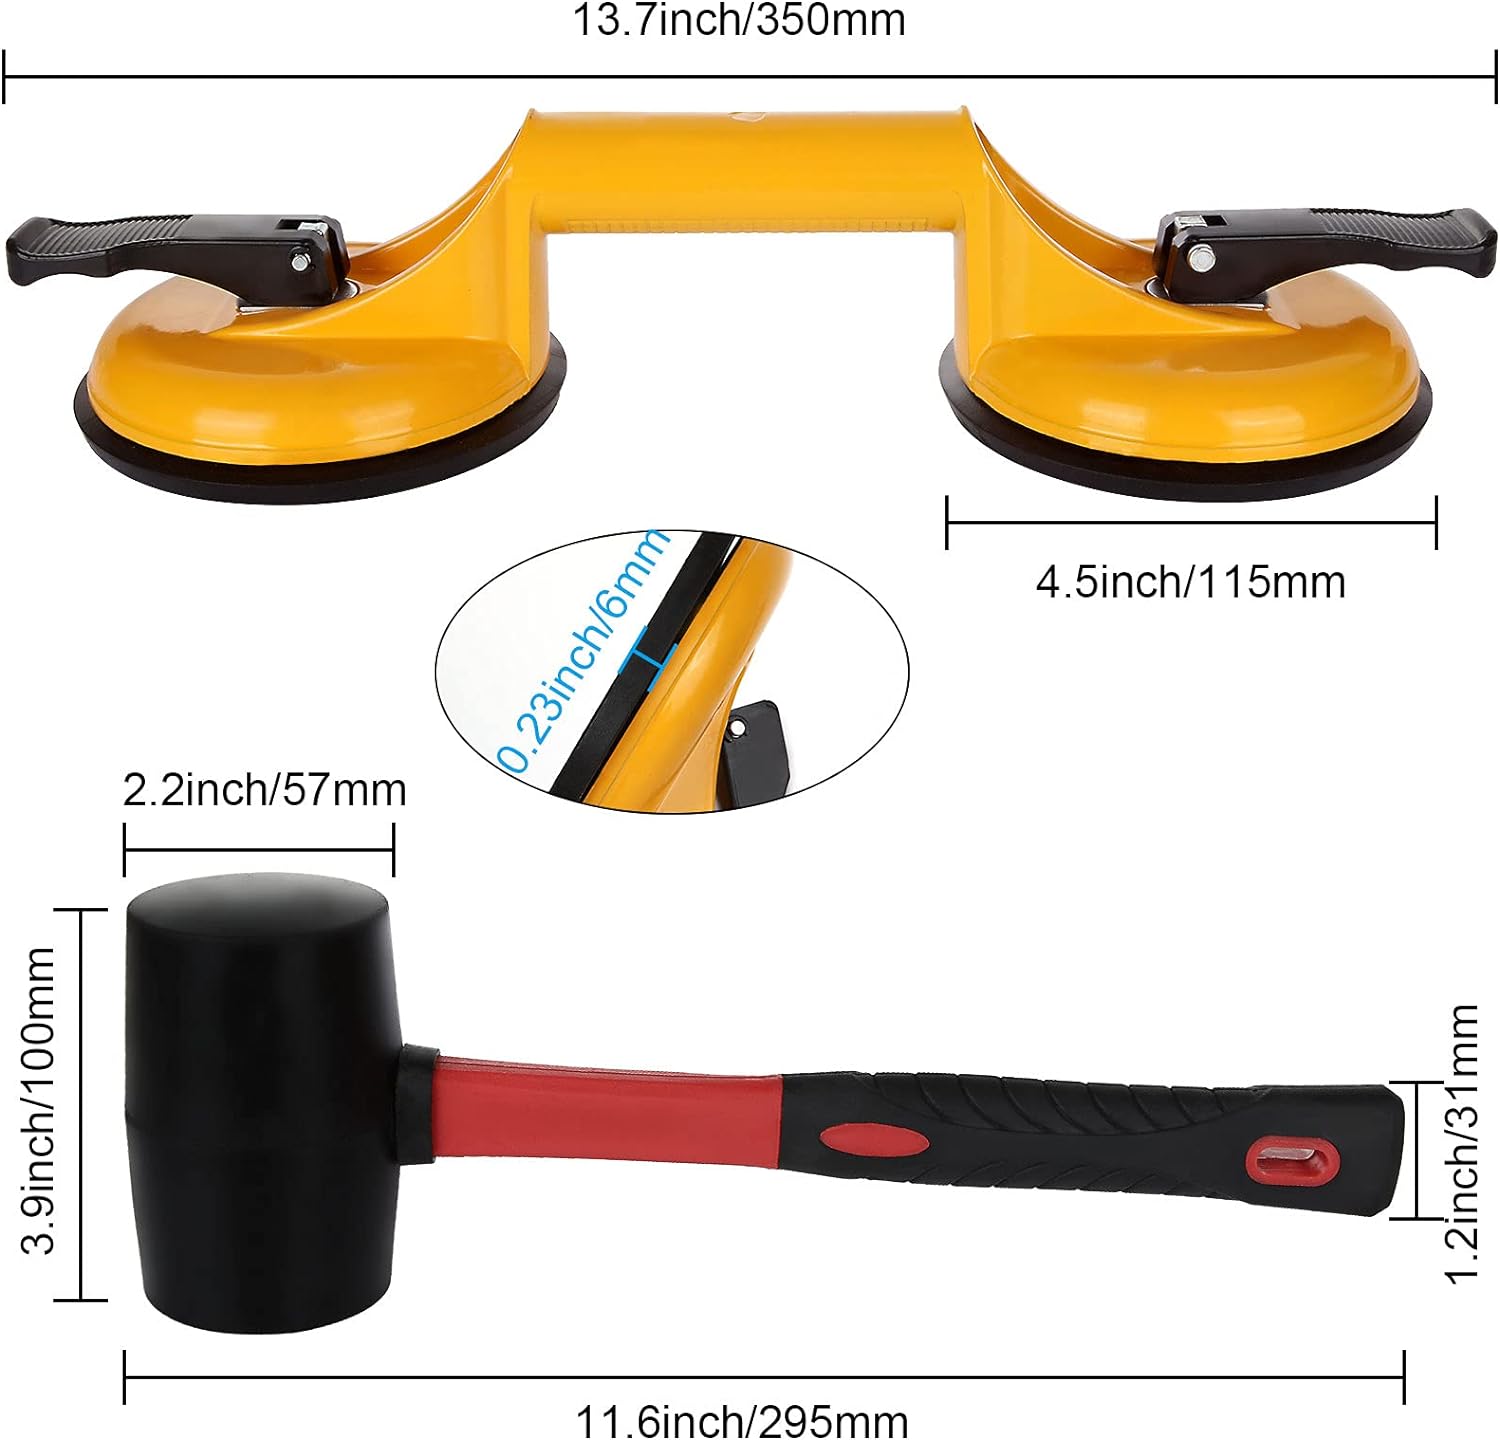 fviexe Floor Gap Fixer Tool for Laminate Floor Gap Repair Include Suction Cup and Mallet for Vinyl Plank (Can't use on scraped surface